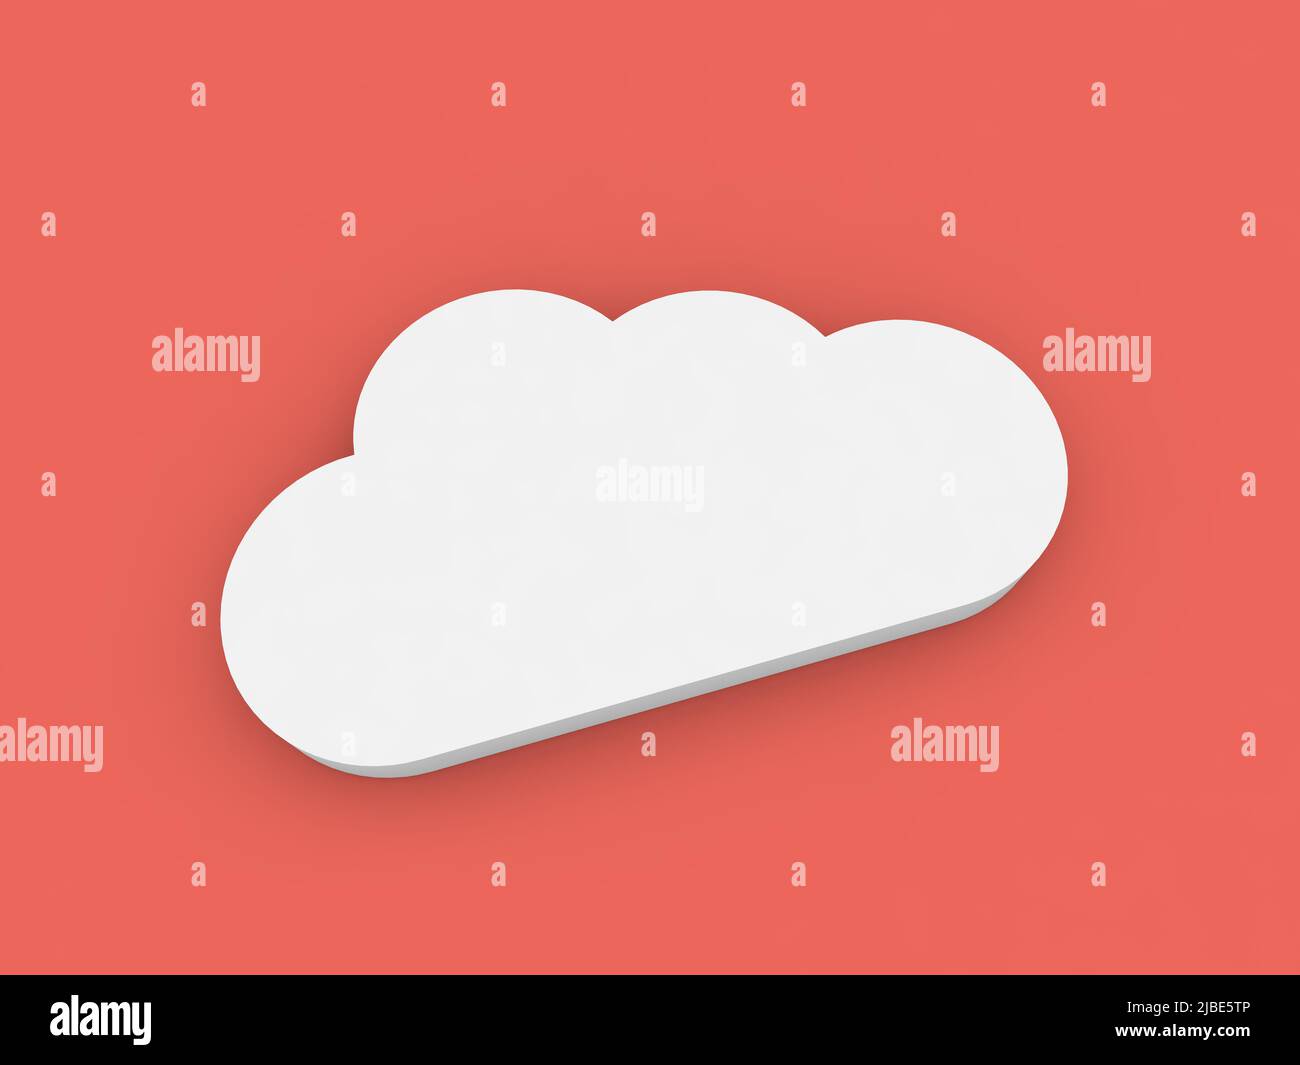 Abstract cloud internet symbol on red background. 3d render illustration. Stock Photo